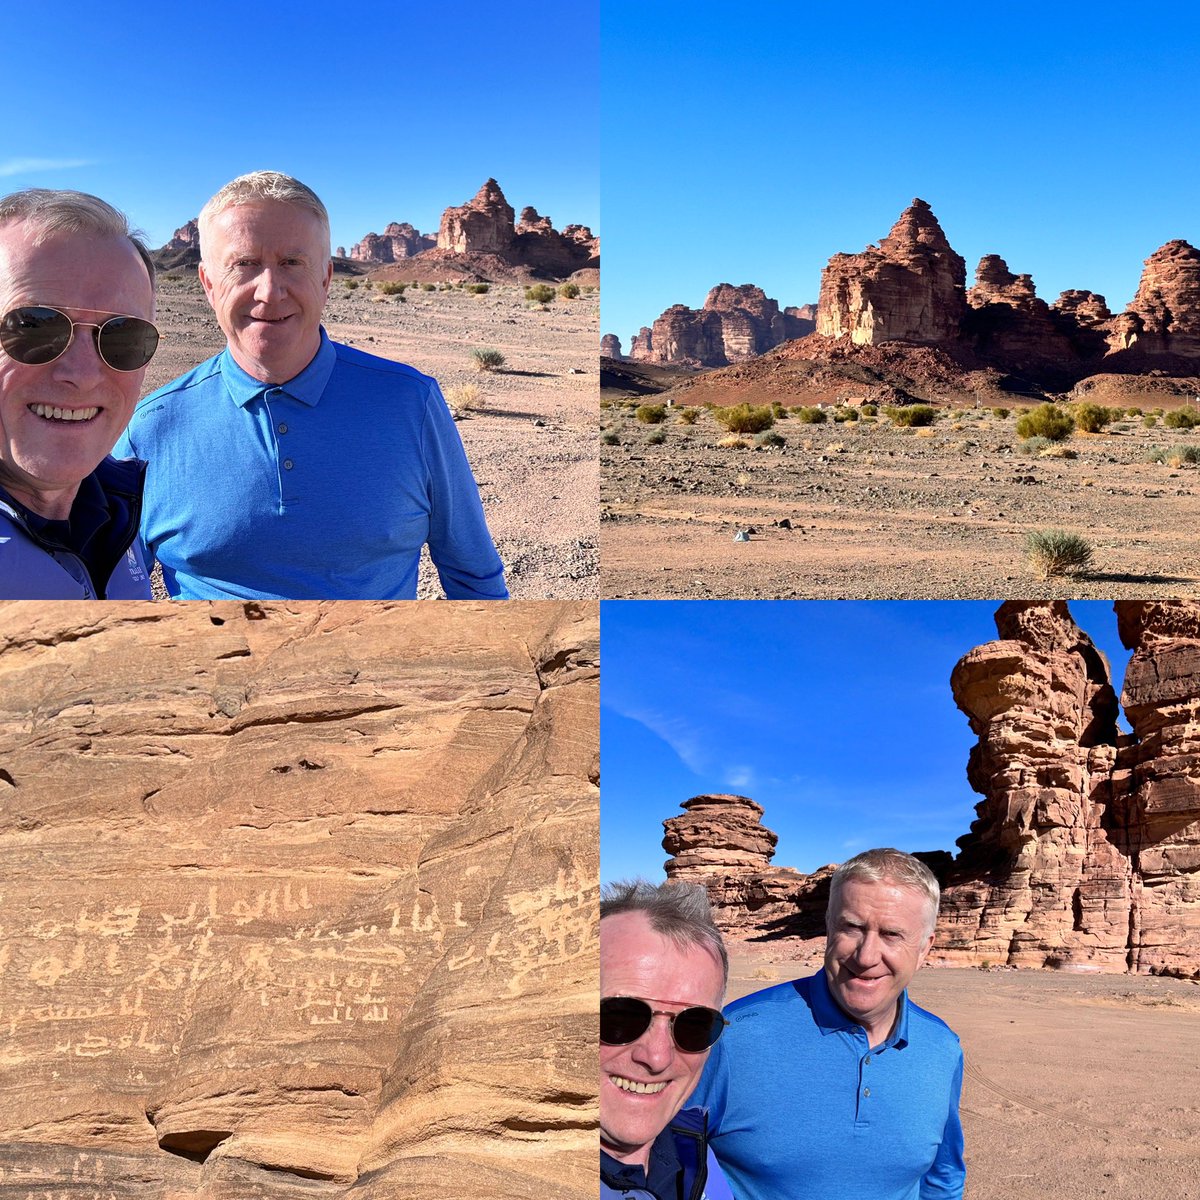 Exploring the Hisma Desert in NEOM today with newly appointed Director of Sales and Marketing for Tourism, Kevin Keogh. Welcome to #NEOM Kevin.